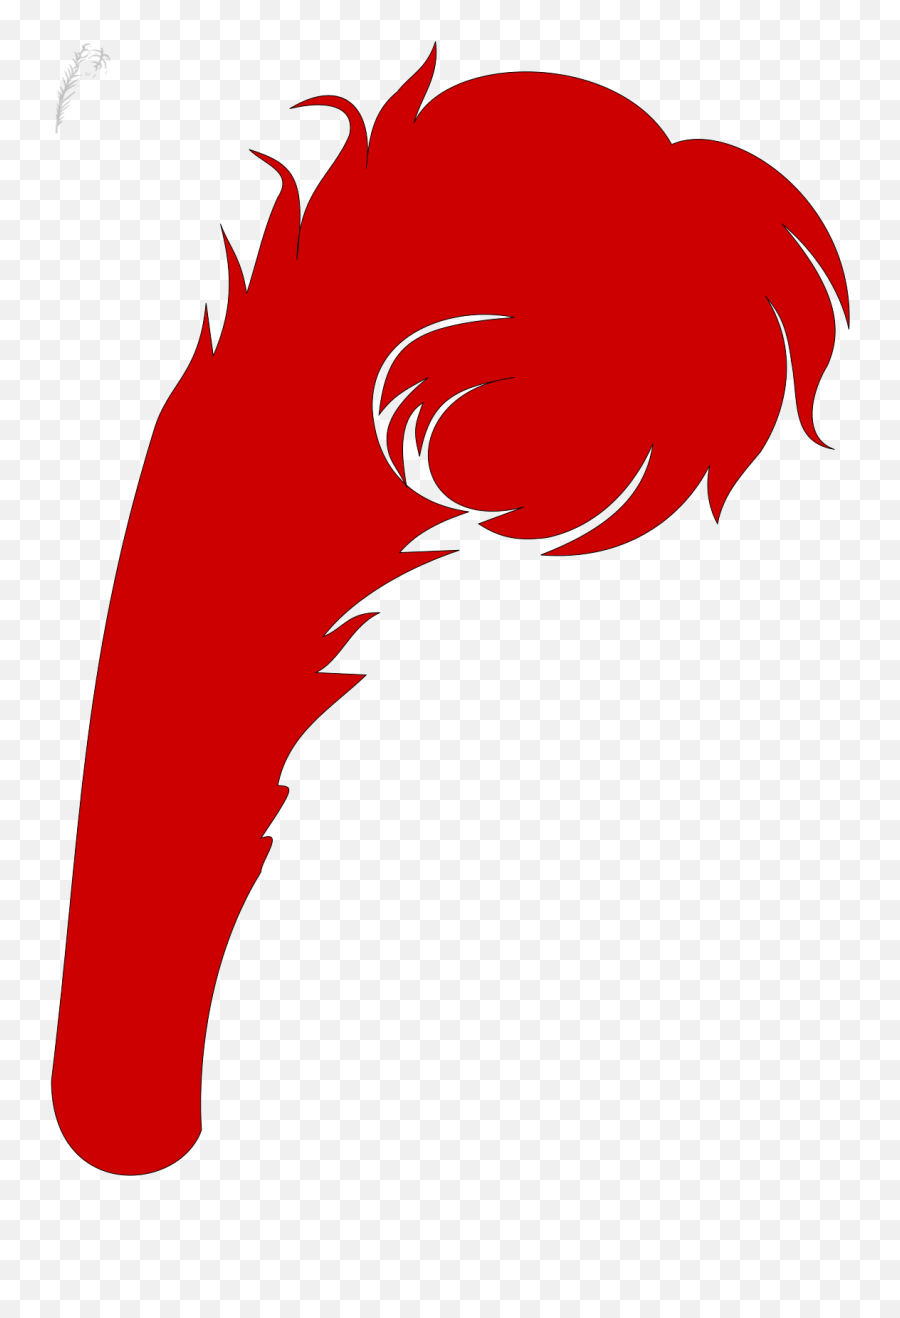 Red Feather 1 Svg Vector Red Feather 1 Clip Art - Svg Clipart Emoji,Feather Transparent